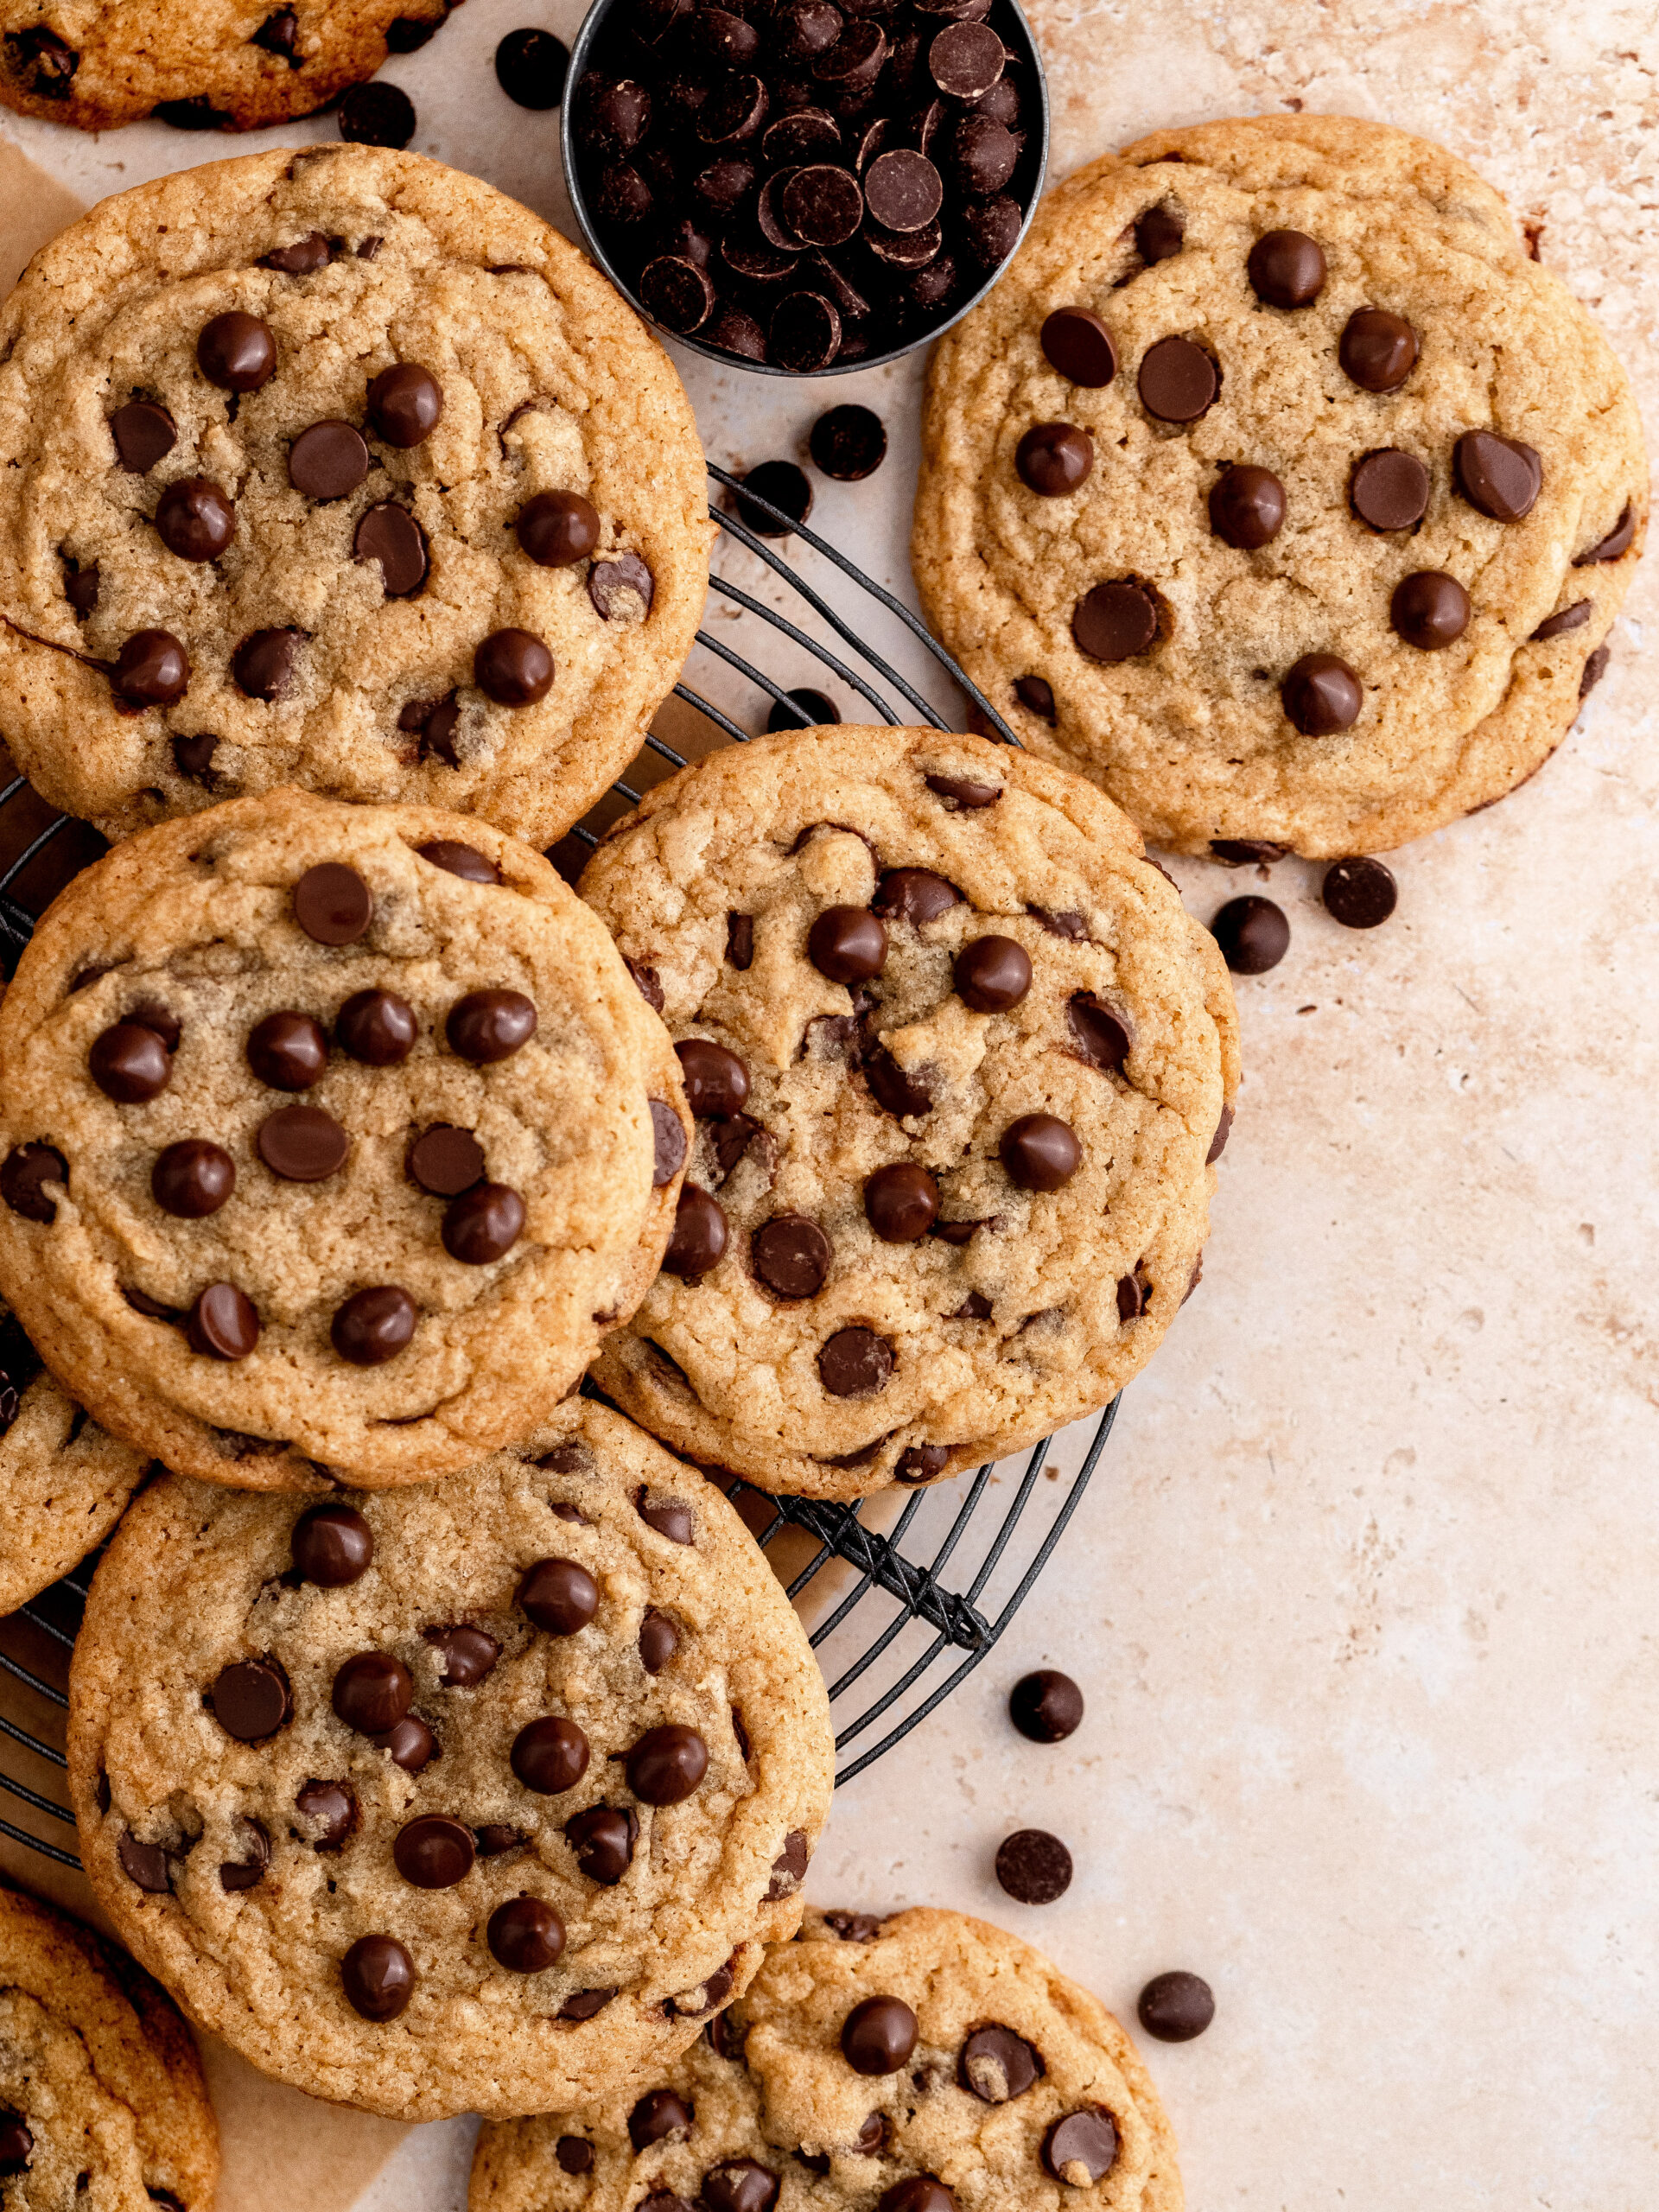 https://juliemarieeats.com/wp-content/uploads/2023/01/Bakery-Style-Chocolate-Chip-Cookies-14-scaled.jpg